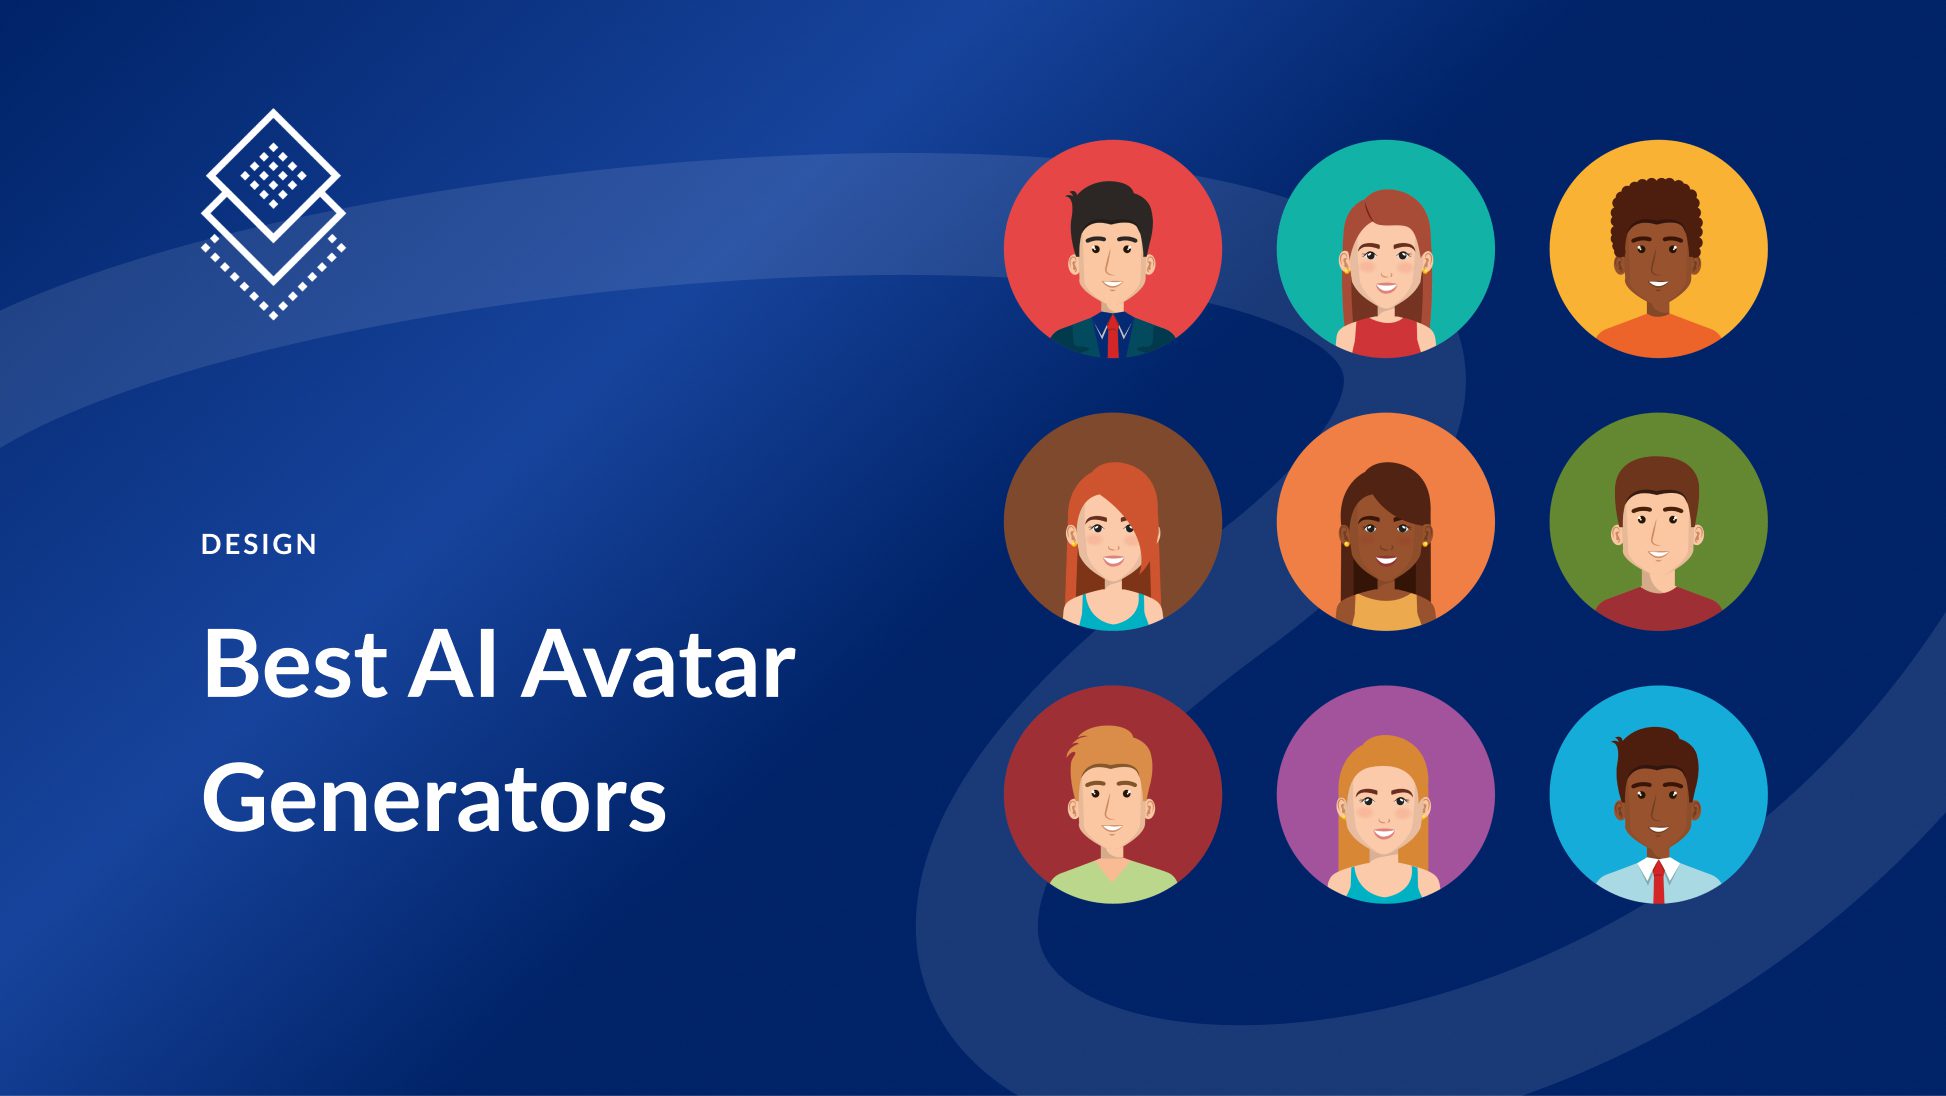 The Animated Avatar, Border and Mini Background have been added to